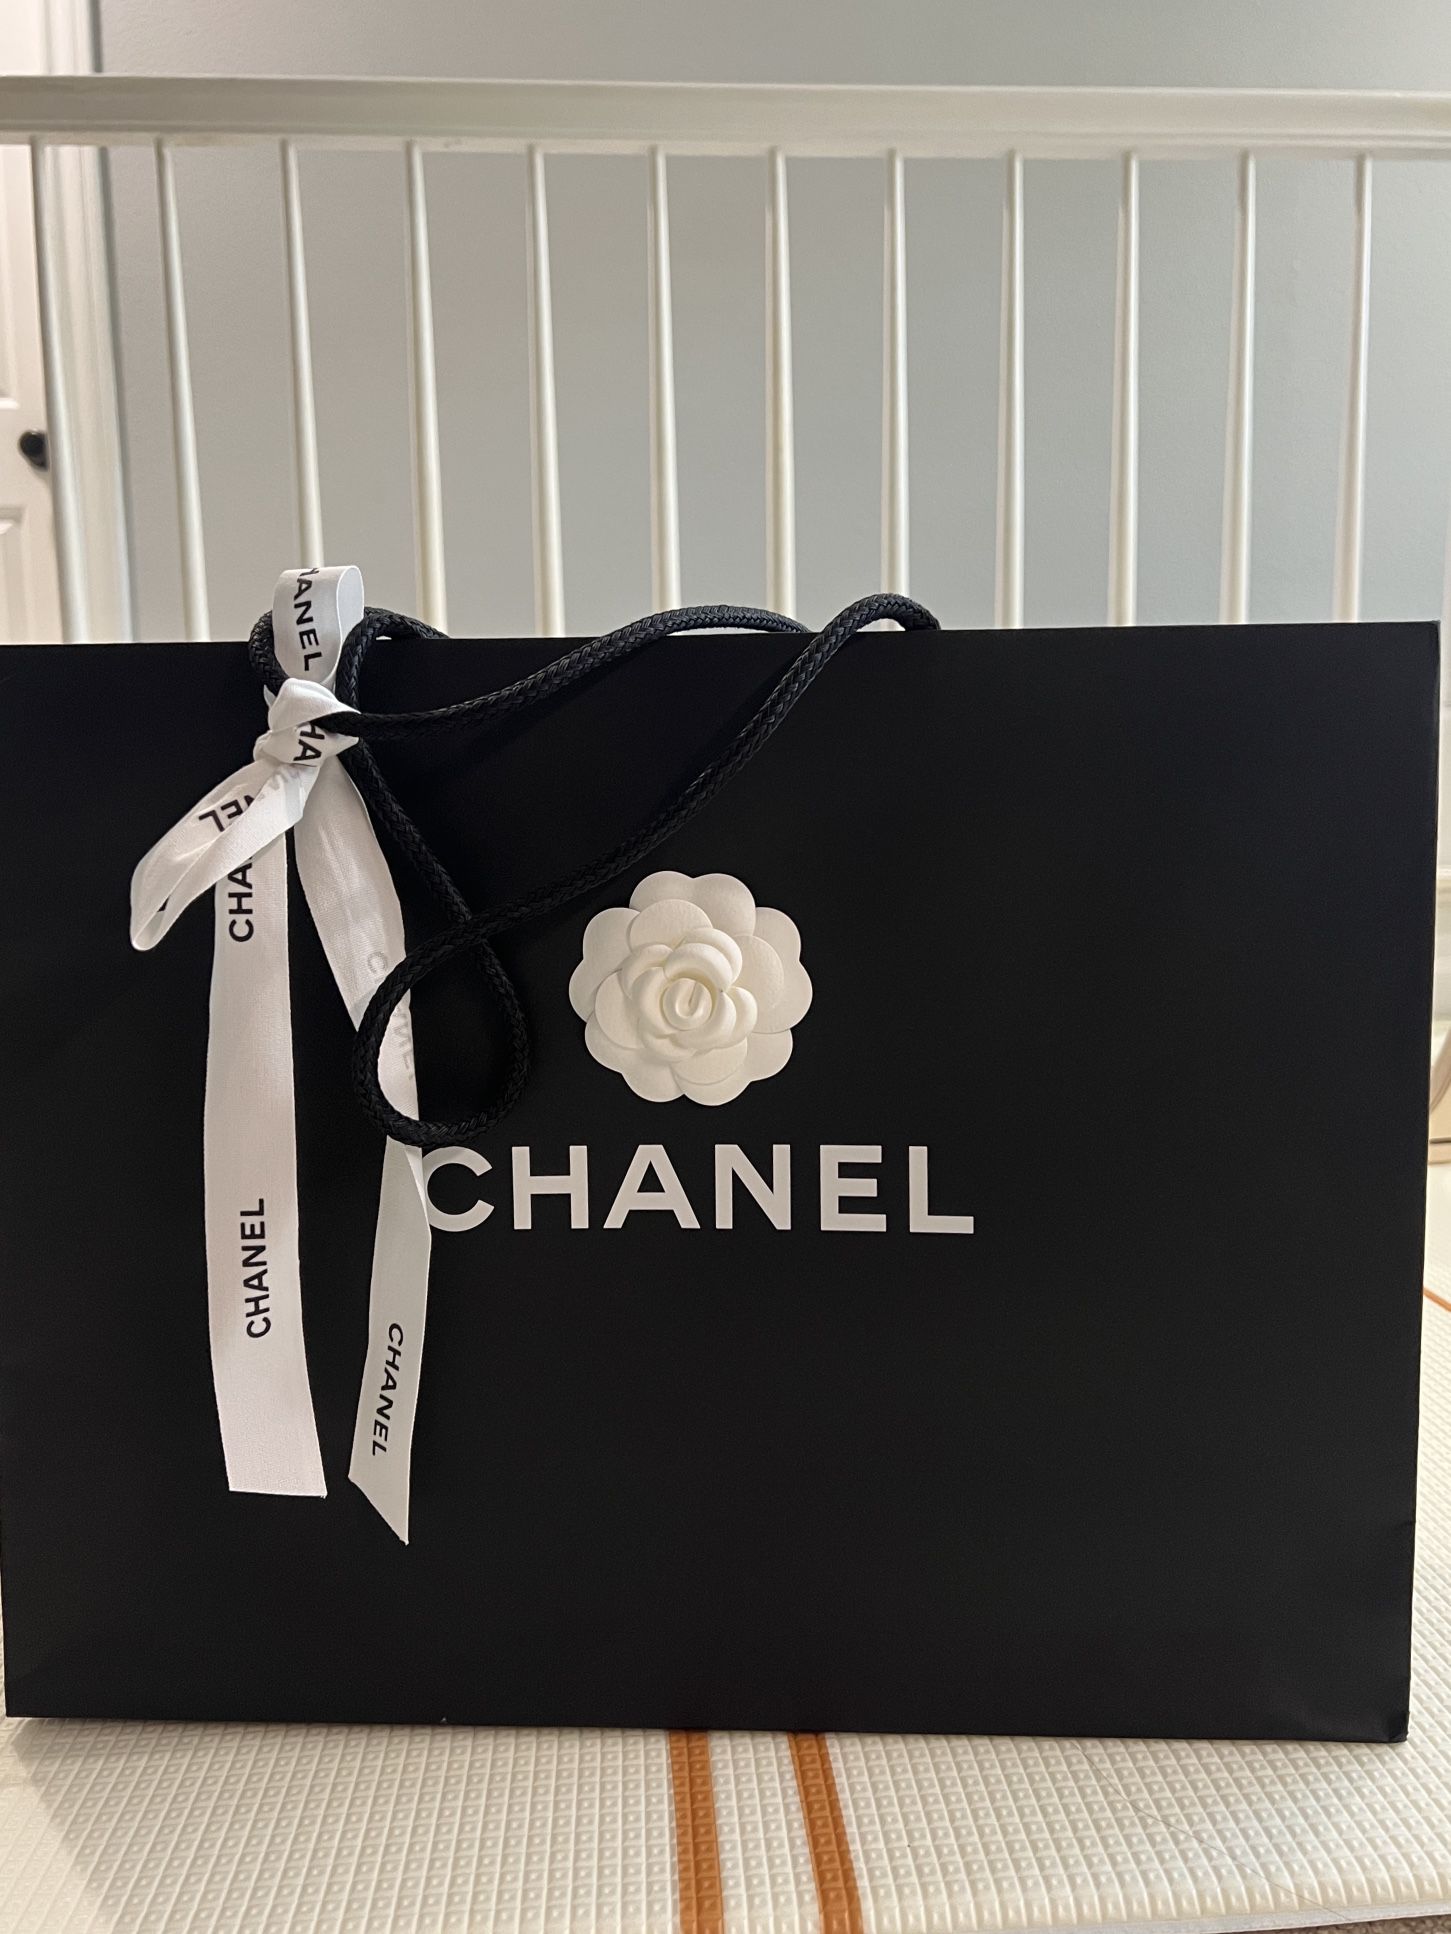 Chanel Tote Bag with Pearl for Sale in Bellevue, WA - OfferUp